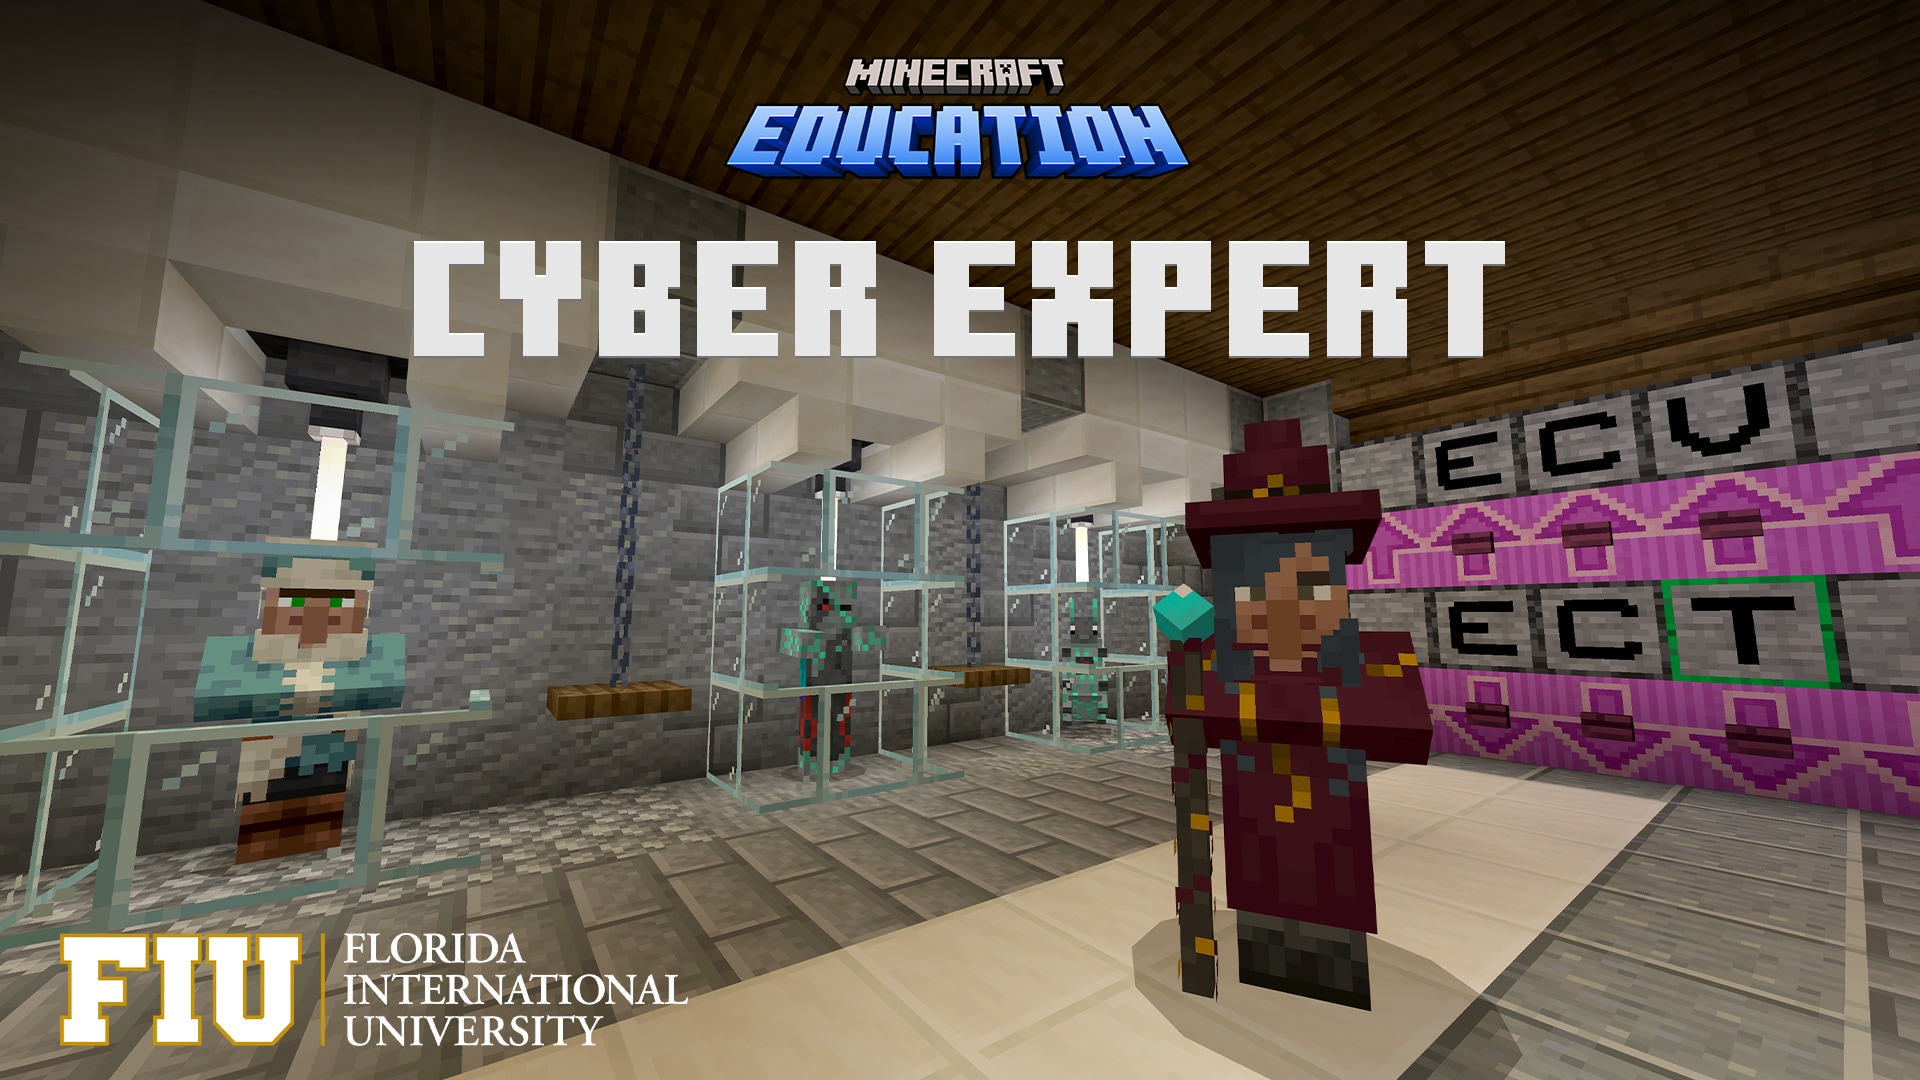 A wizard stands below an image caption: Cyber Expert. Creatures representing cyber threats are in cages along a wall.